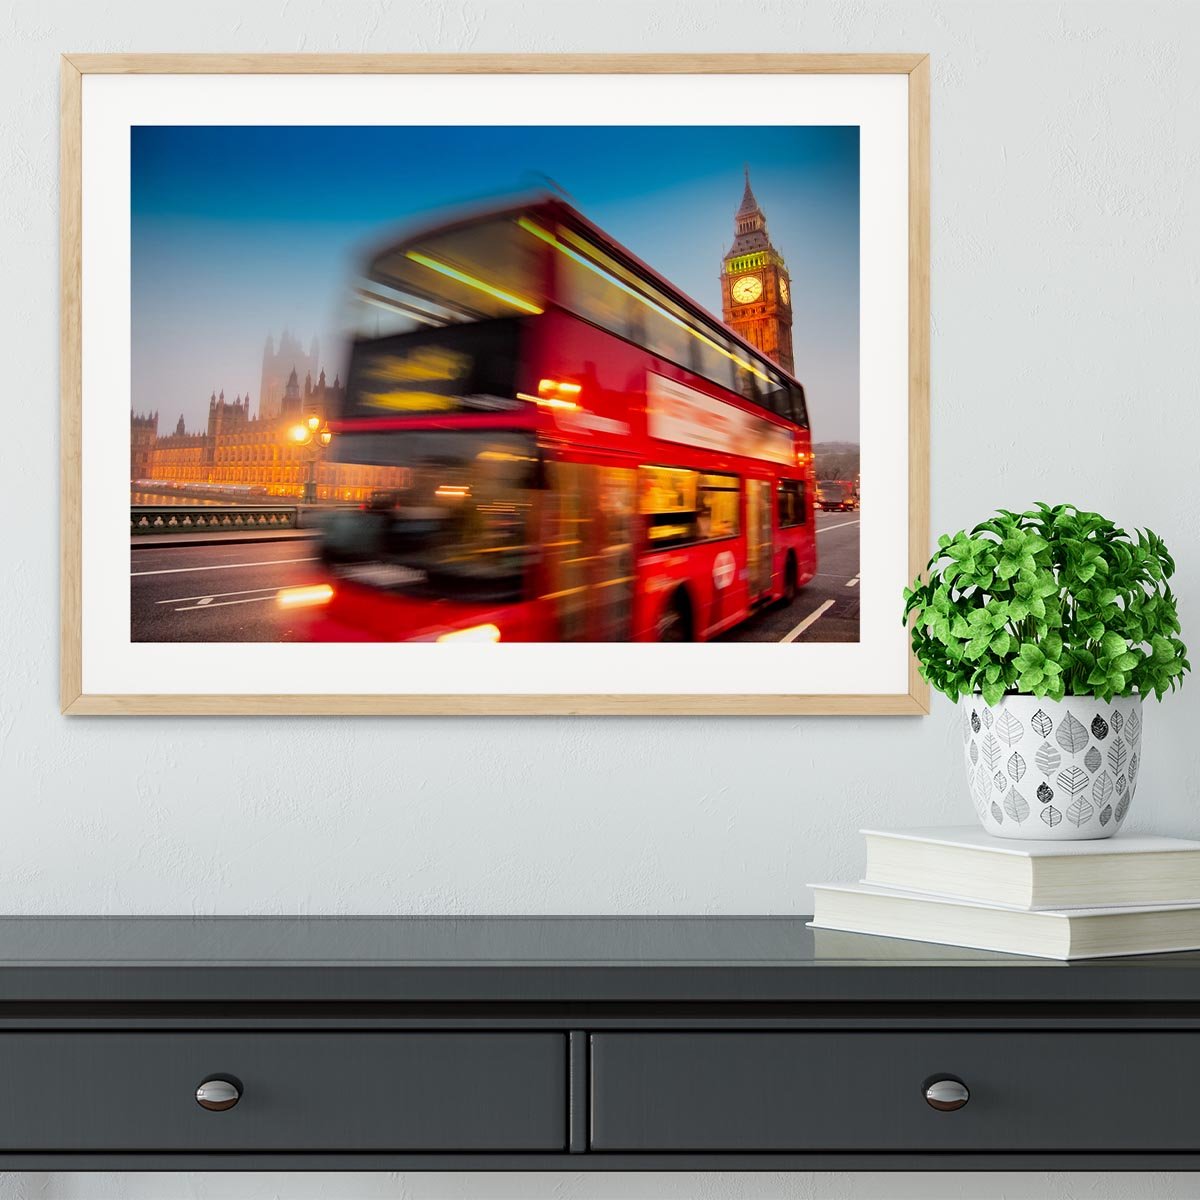 Houses Of Parliament red double-decker bus Framed Print - Canvas Art Rocks - 3